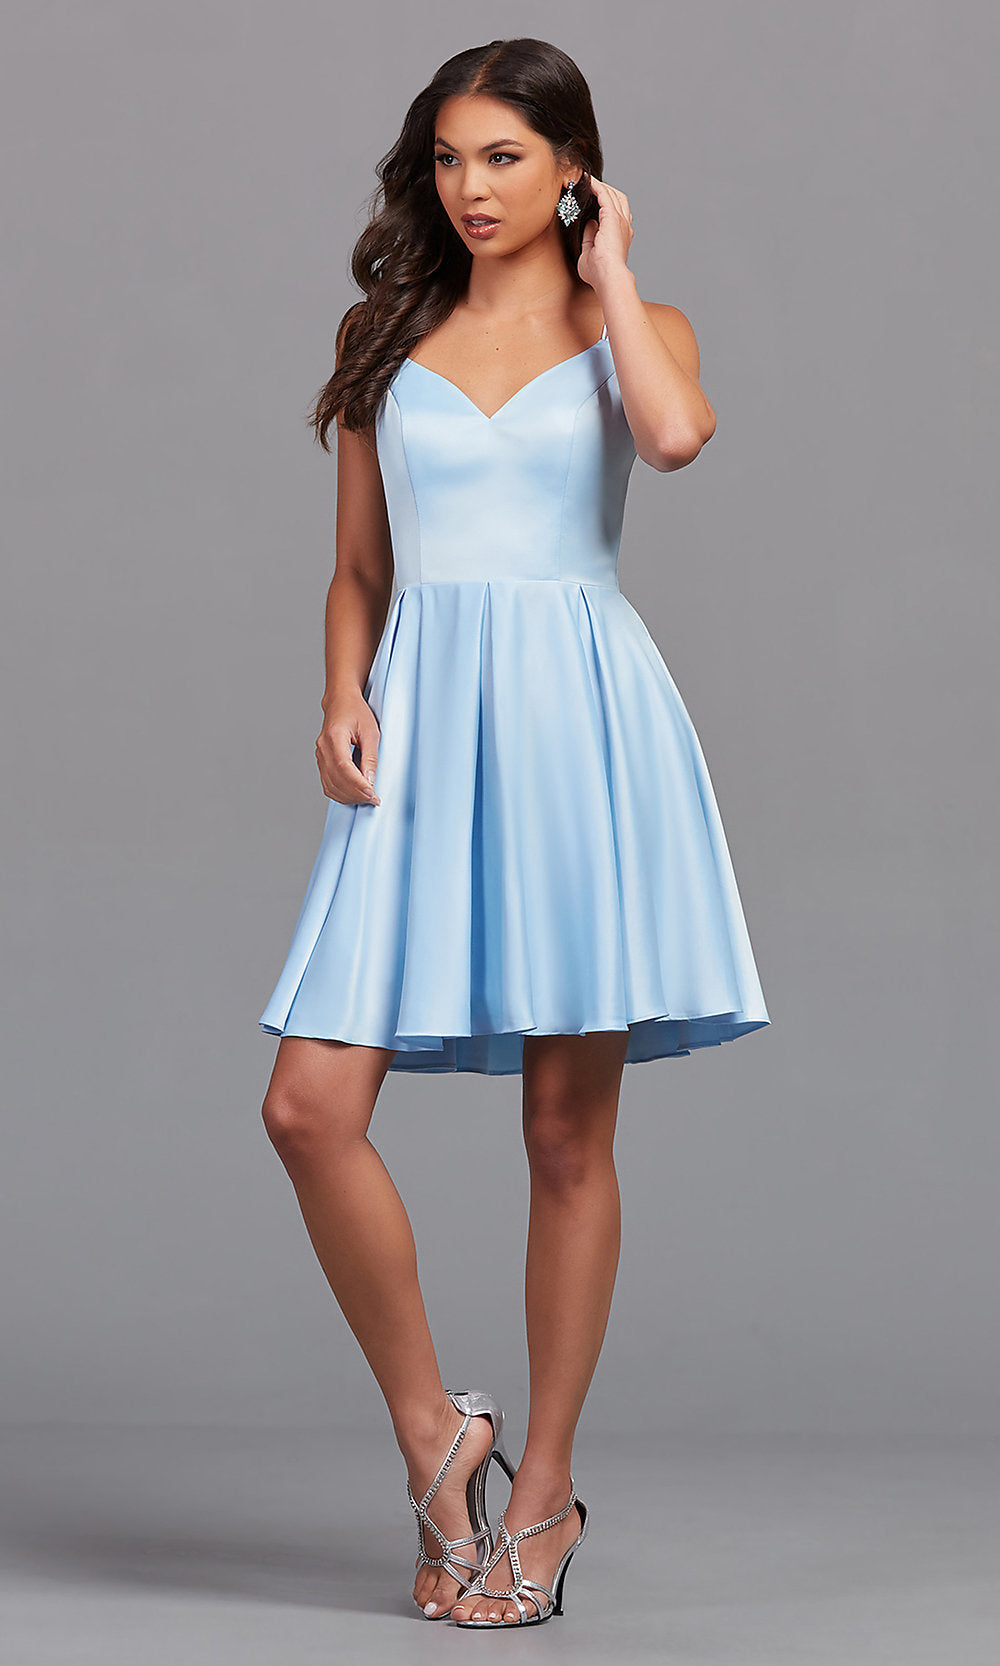 Cute Short Satin A-Line Prom Dress by PromGirl